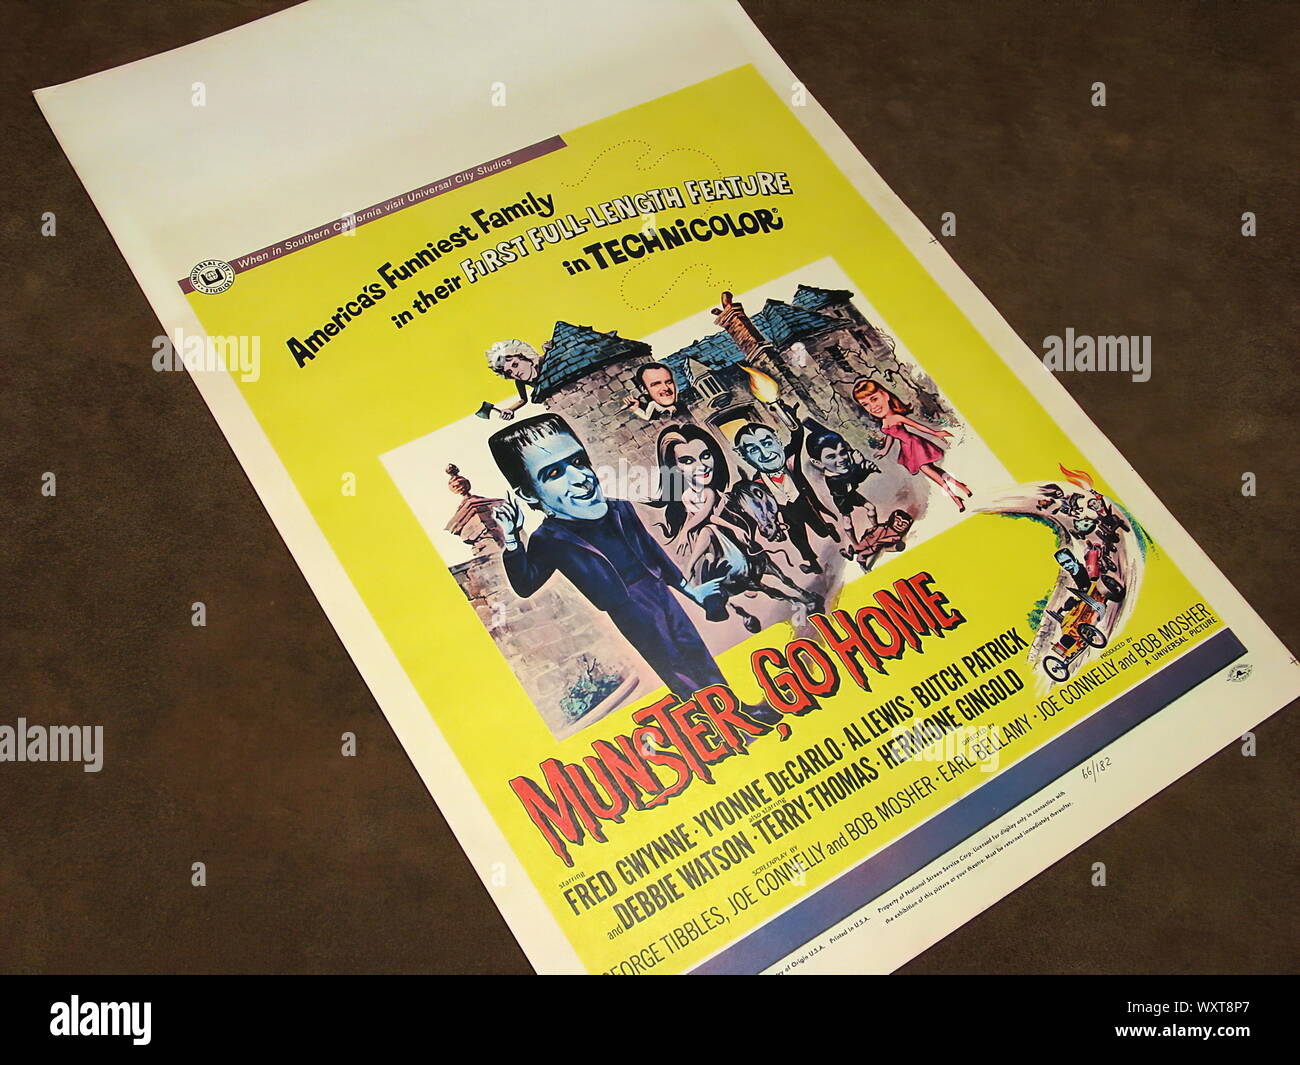 Classic movie poster of Munster, Go Home 1966. Stock Photo